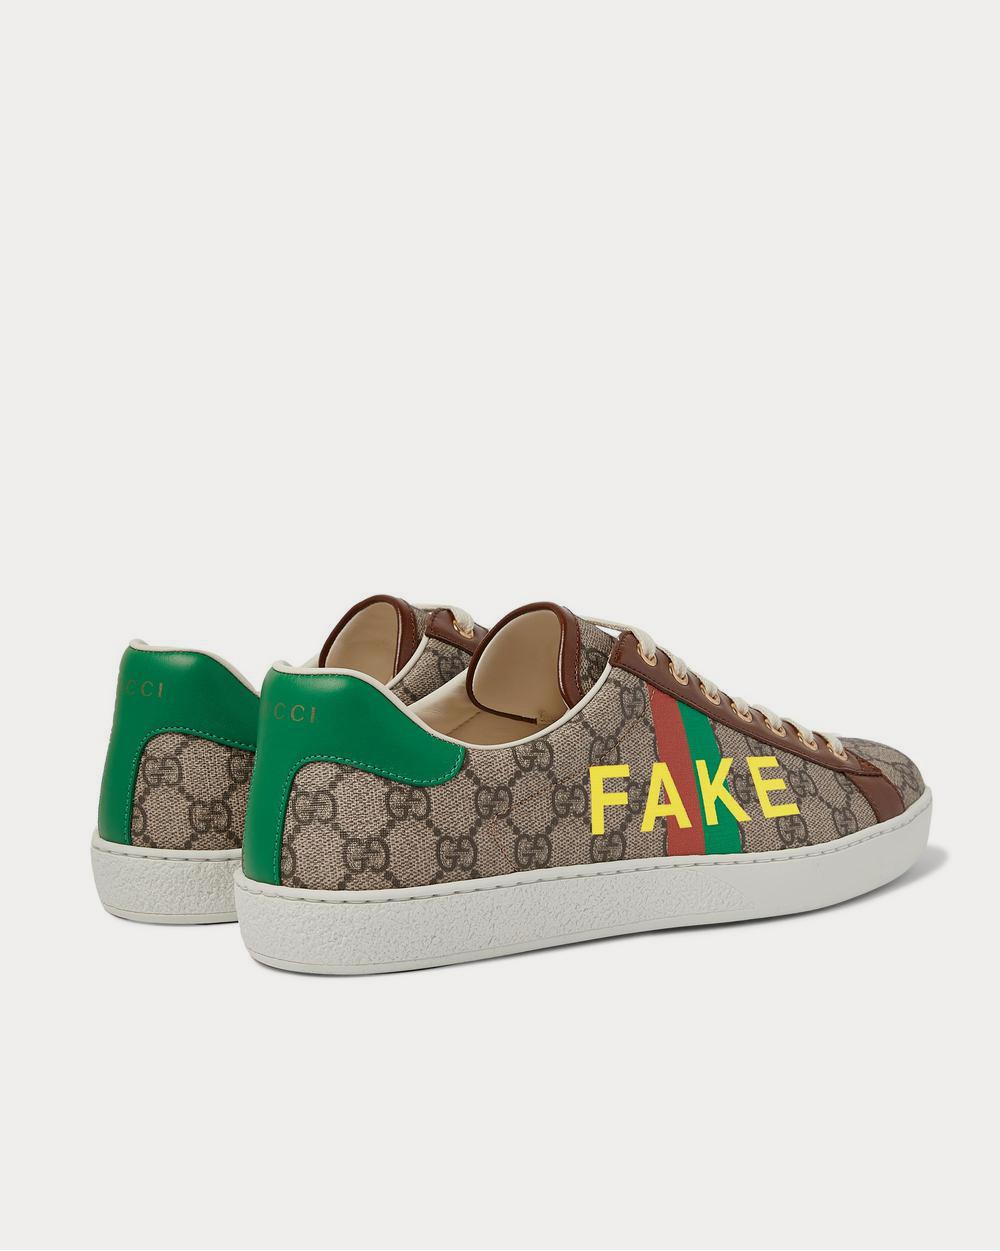 Gucci - Ace Printed Leather-Trimmed Monogrammed Coated-Canvas  Brown low top sneakers